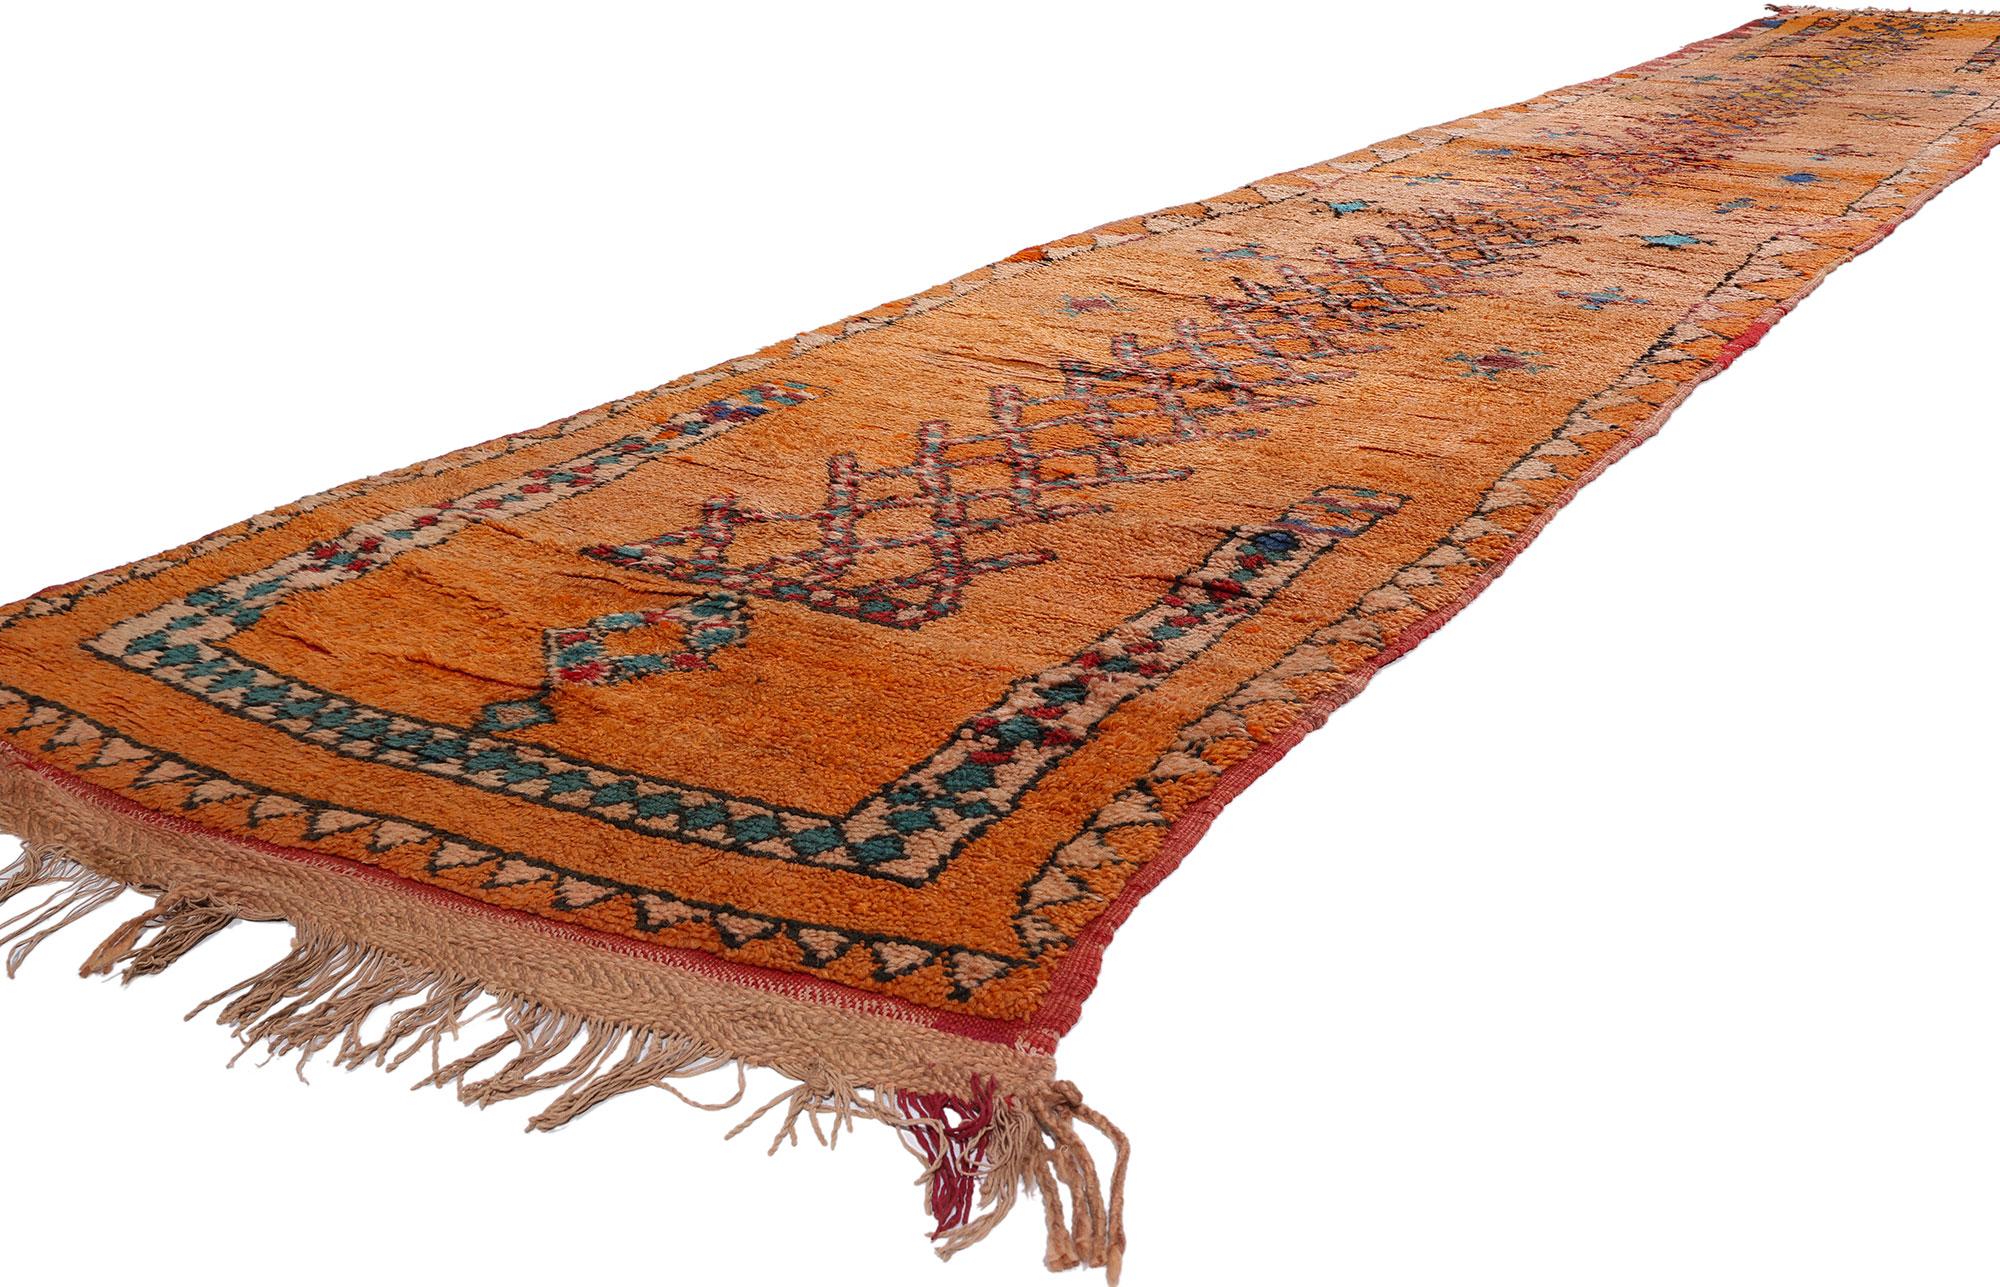 21841 Extra-Long Vintage Orange Boujad Moroccan Rug, 03'03 x 19'05. Embark on a vibrant journey into the free-spirited allure of Bohemian style with this hand-knotted wool vintage Moroccan rug, originating from the lively city of Boujad within the